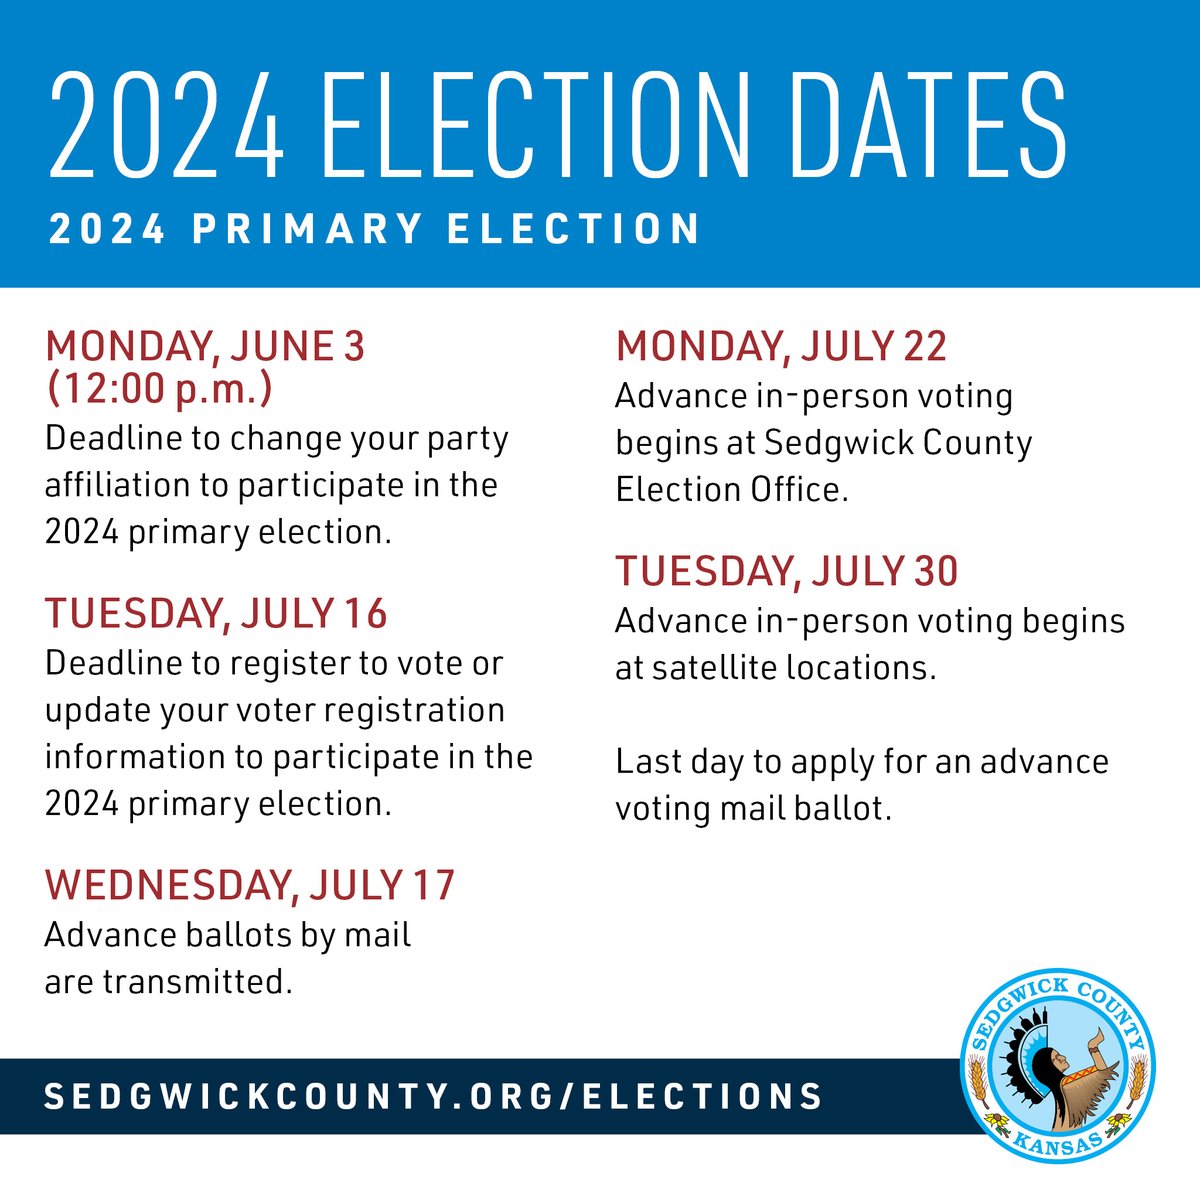 Attention, all future voters! There are some crucial election dates you don't want to miss. Mark your calendars for the first one - Monday, June 3 at 12 p.m. - because that's the deadline to switch your party affiliation to participate in the upcoming Primary Election.